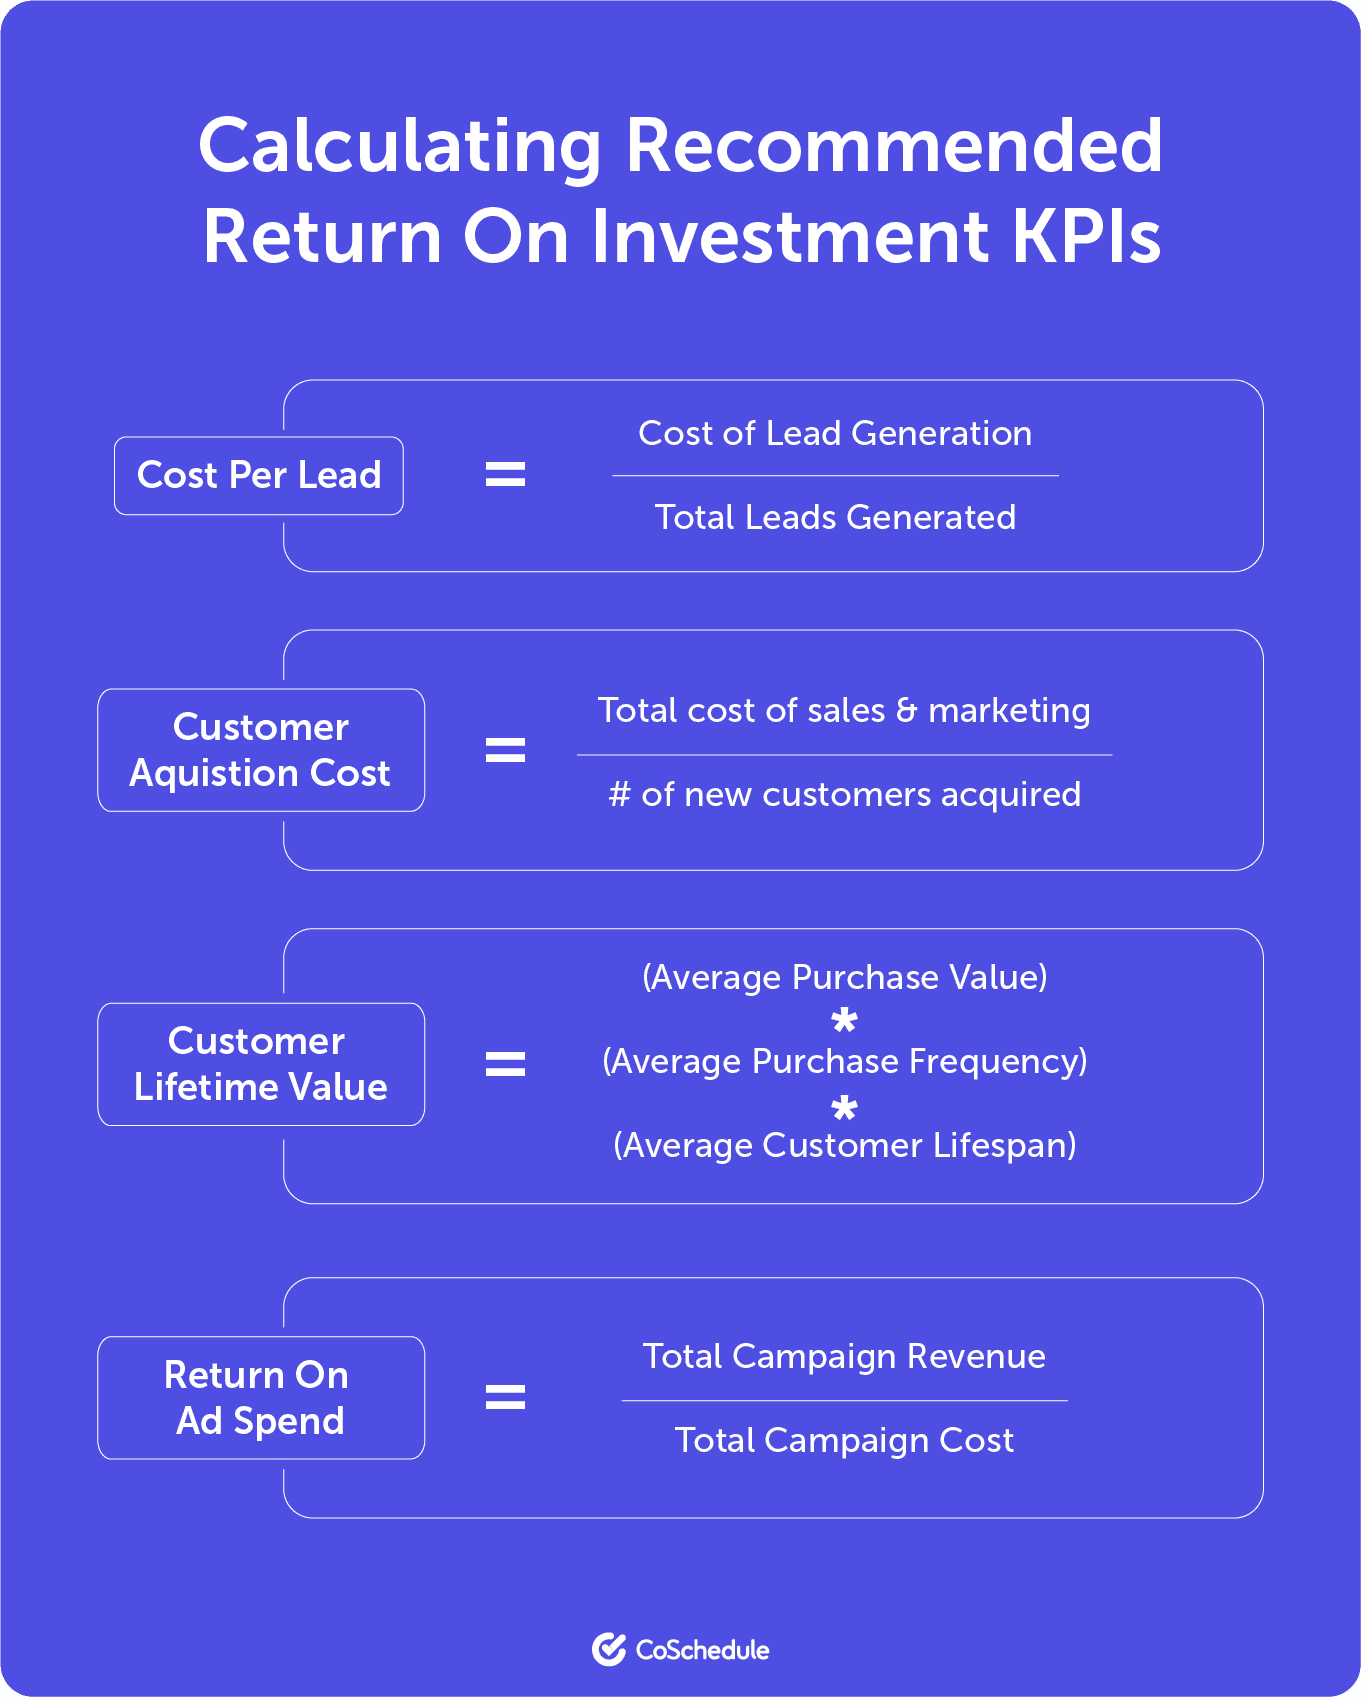 Calculating recommended return on investment KPIs